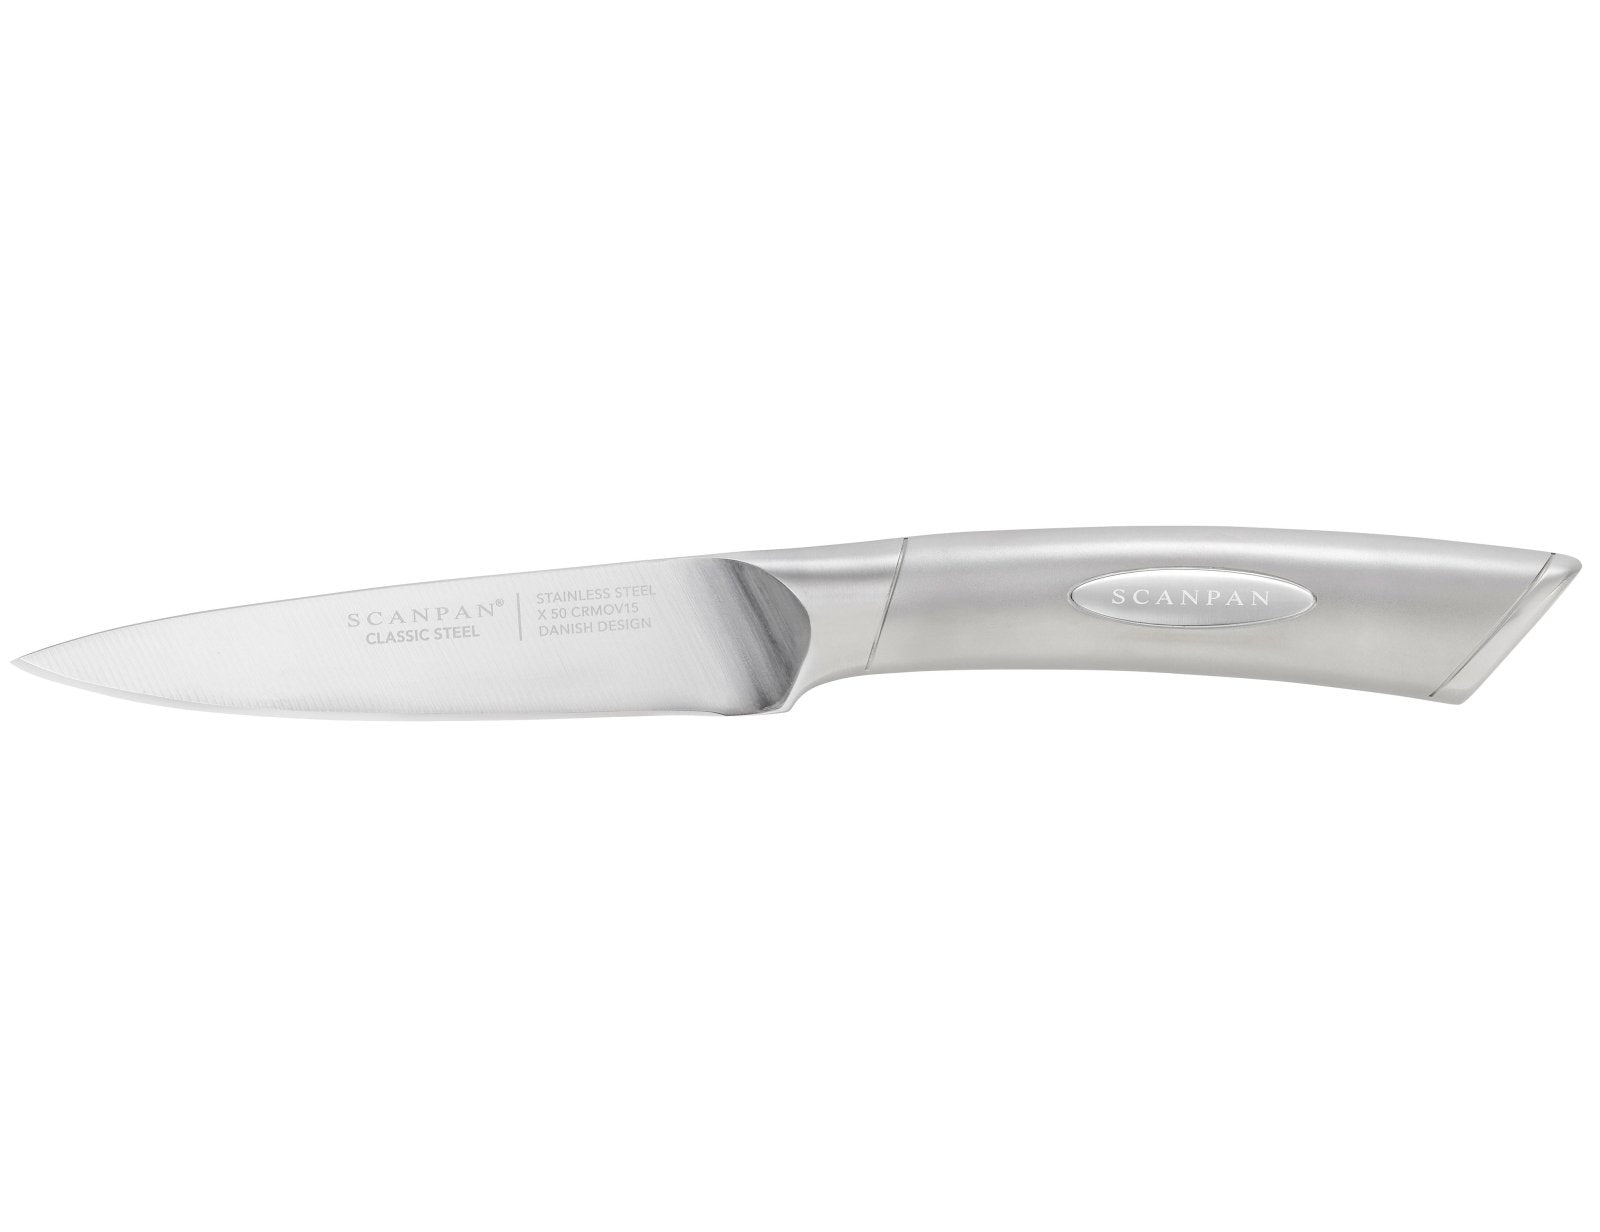 Scanpan Classic Steel 11.5cm Vegetable Knife - SP9001151200 - The Cotswold Knife Company